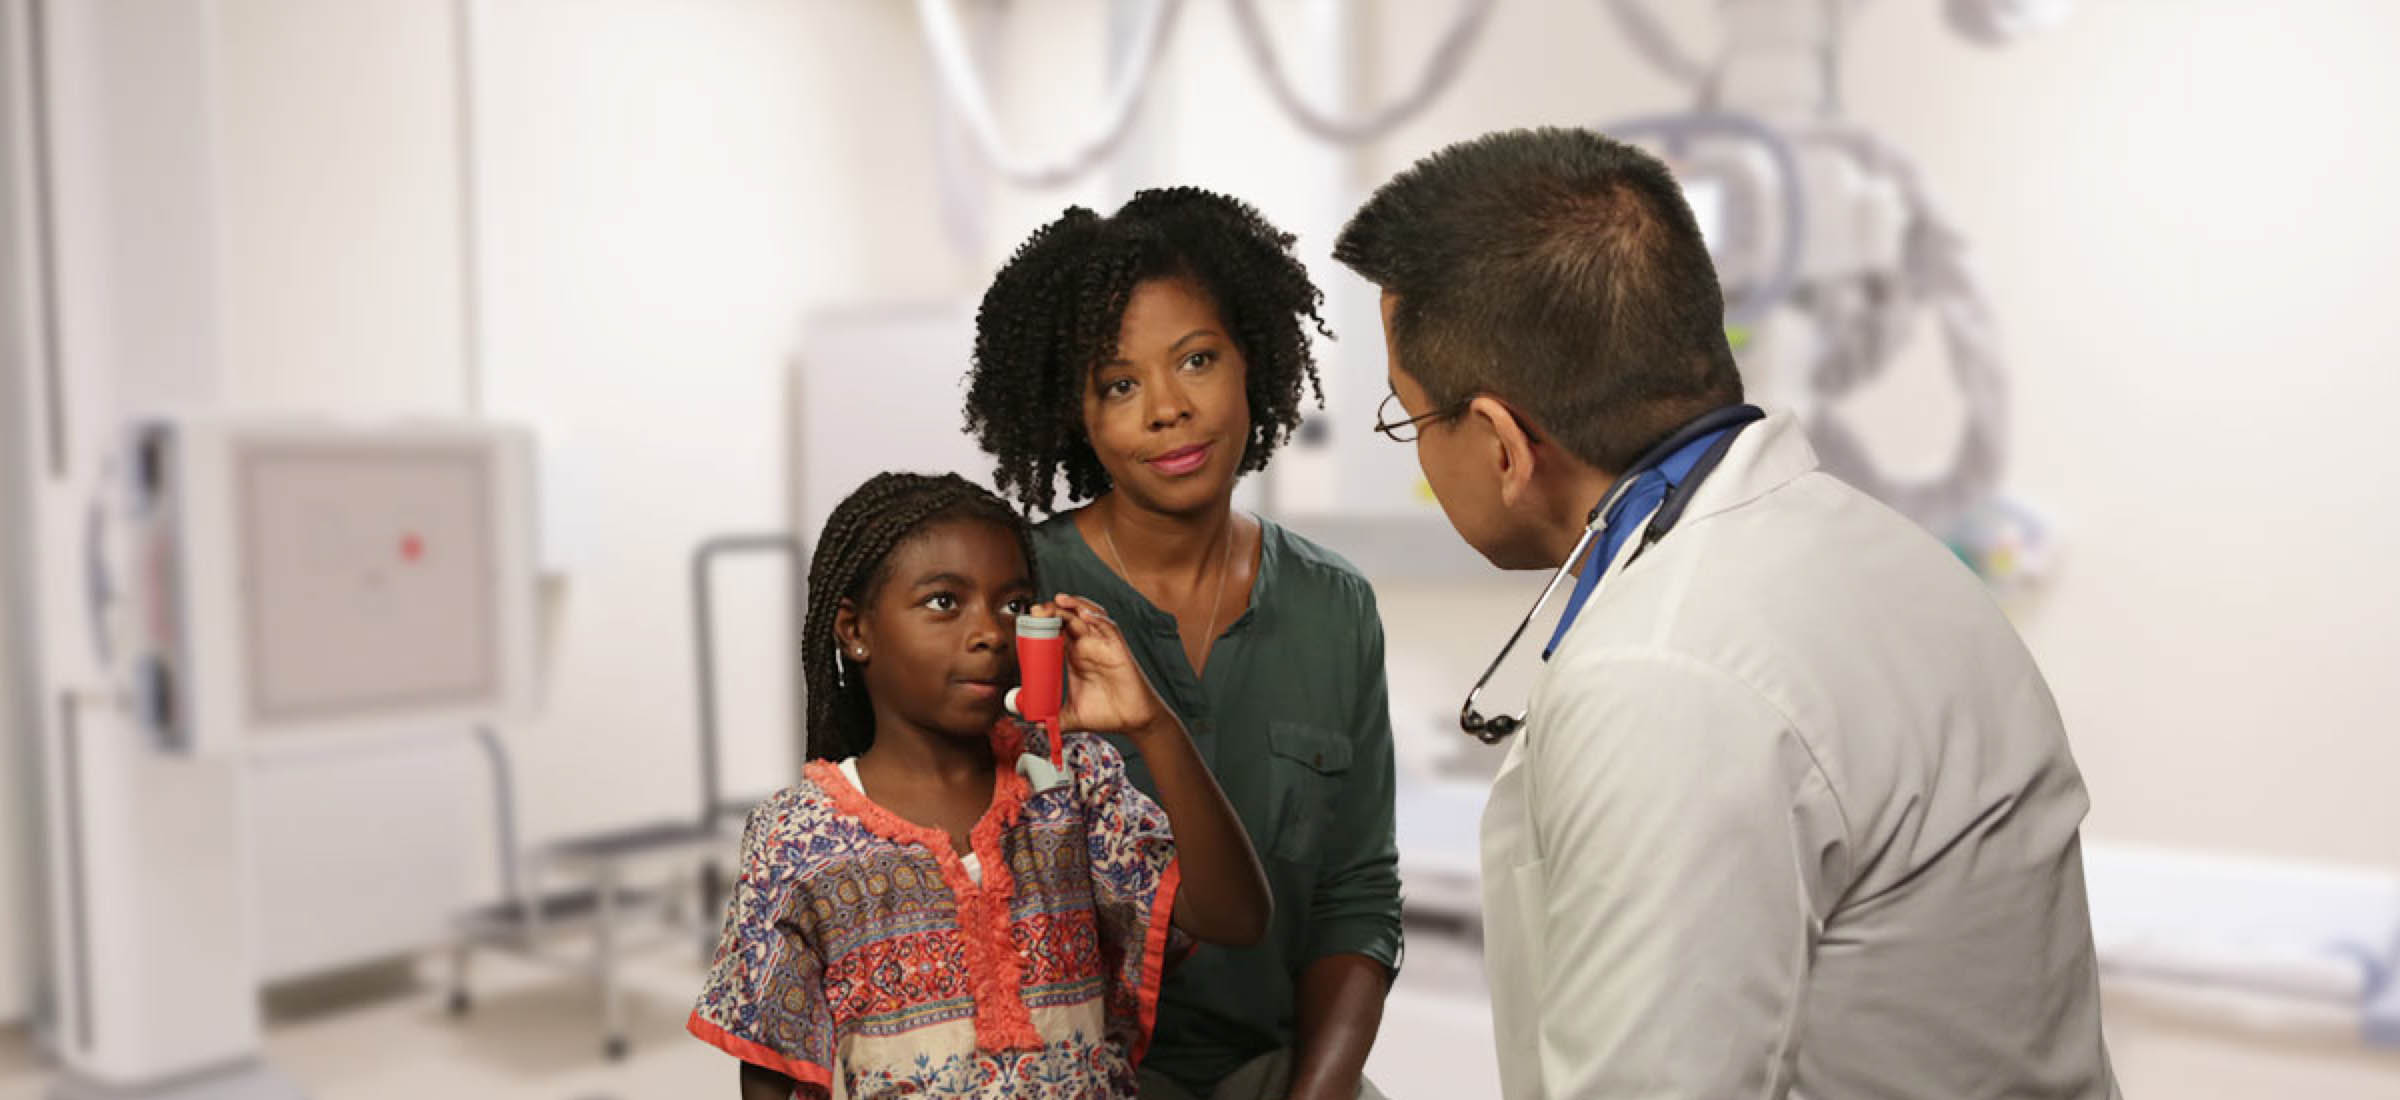 African American child with Asthma talking to a doctor